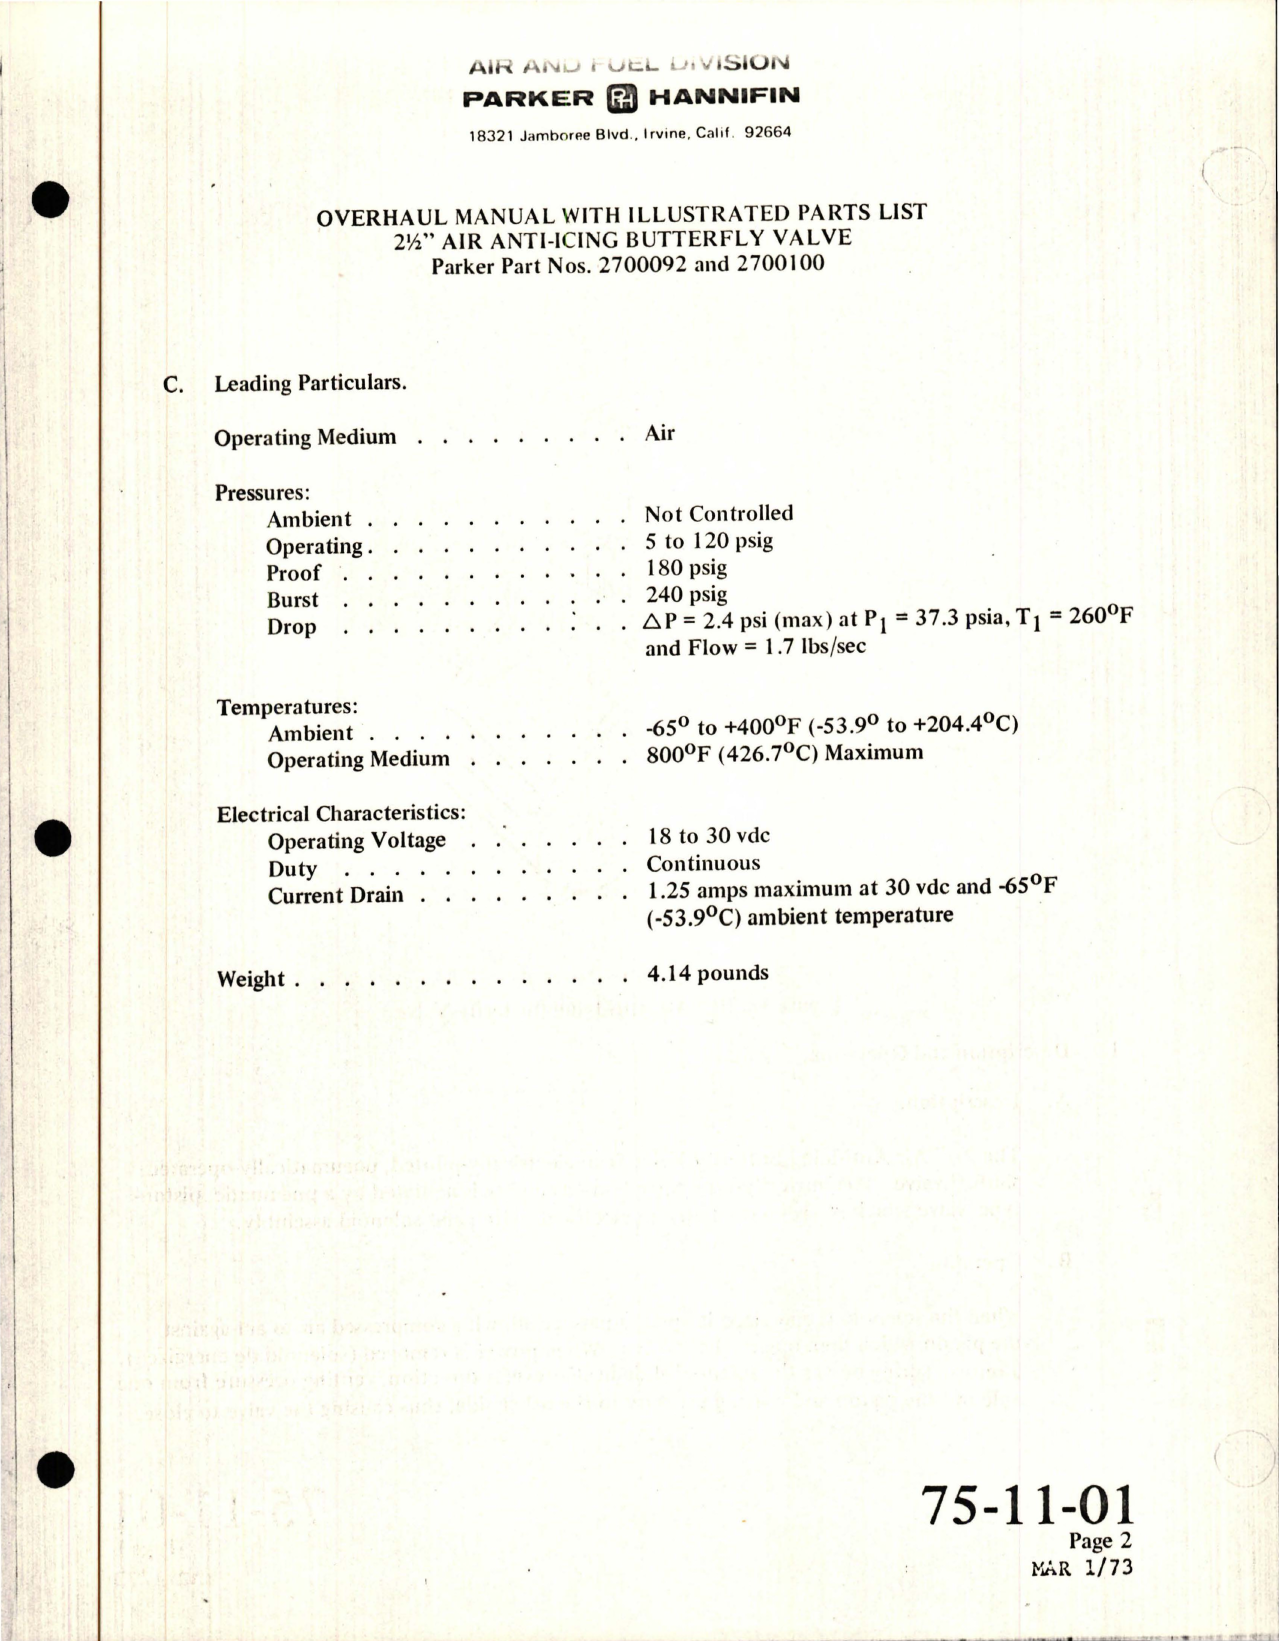 Sample page 9 from AirCorps Library document: Overhaul with Illustrated Parts List for Air Anti-Icing Butterfly Valve 2 1/2